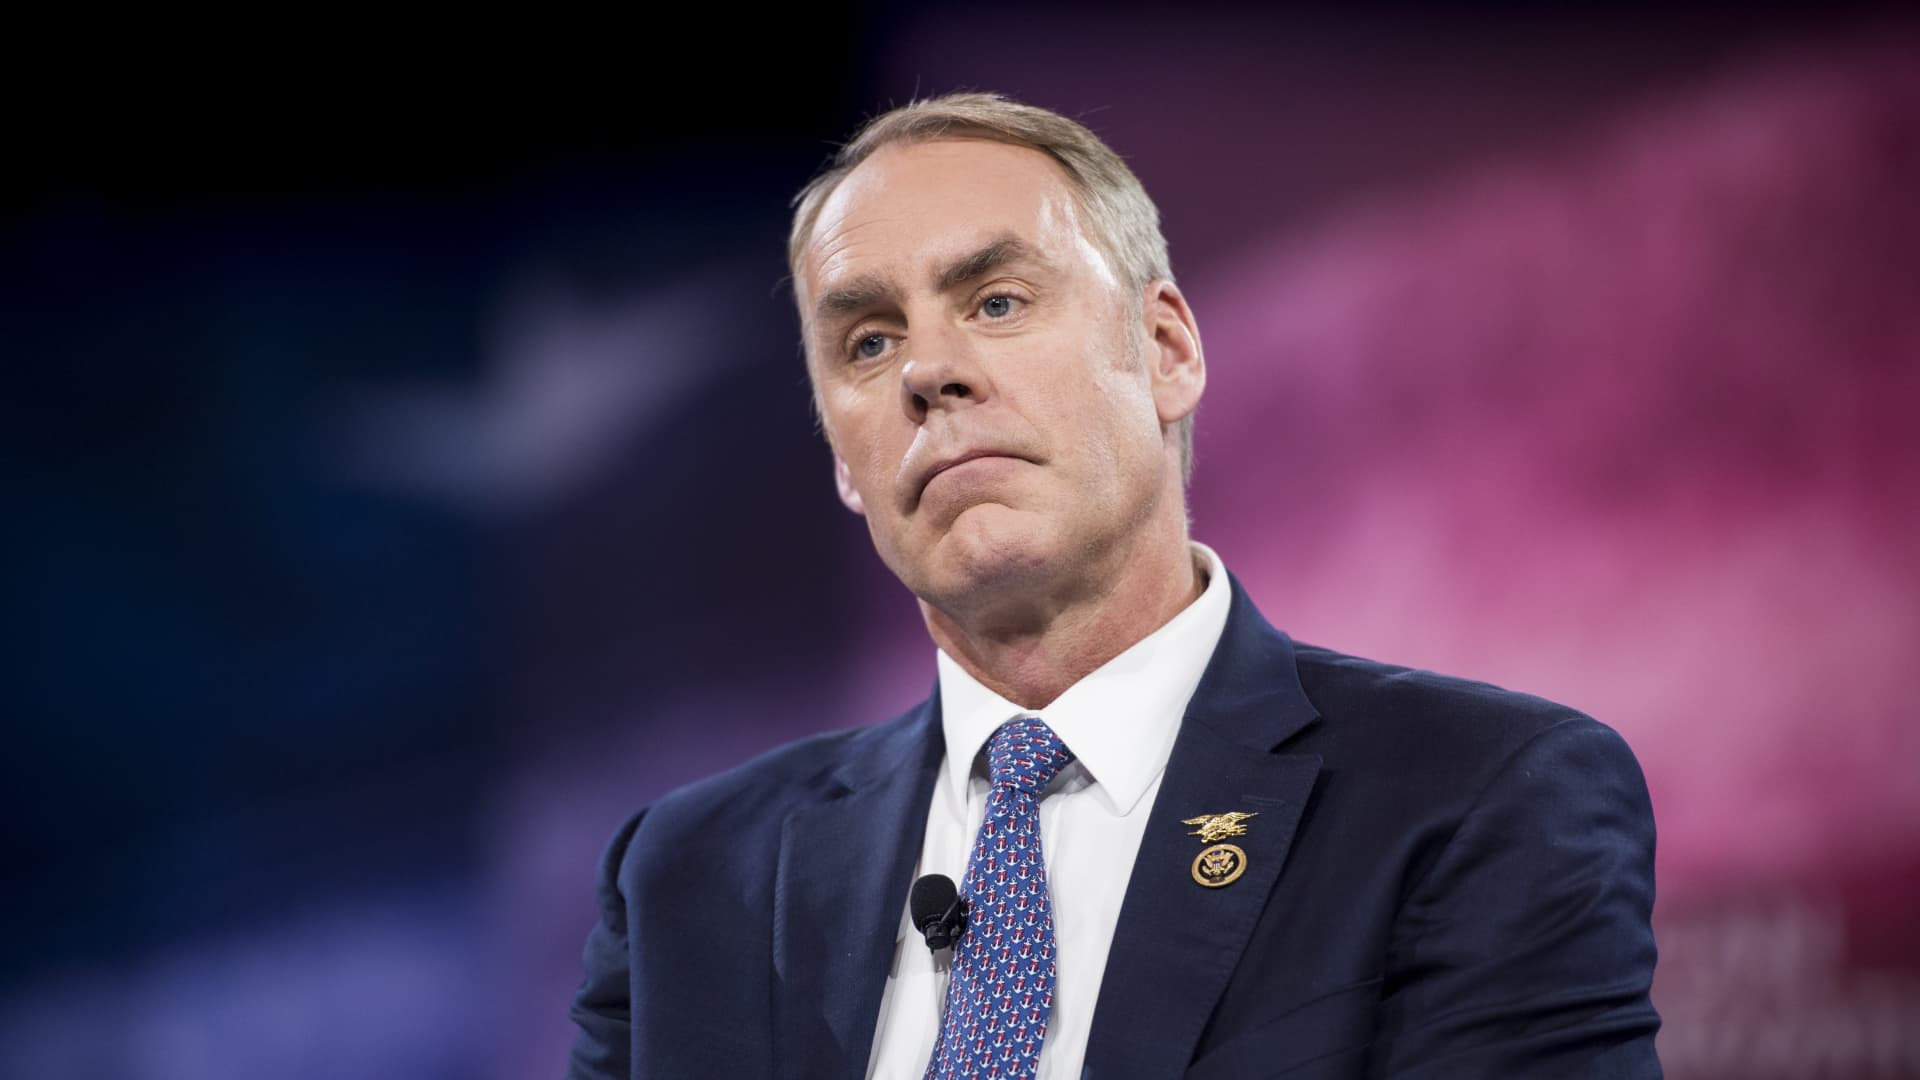 Trump Interior secretary and Montana House seat contender Ryan Zinke lied to department watchdog in casino probe, report finds